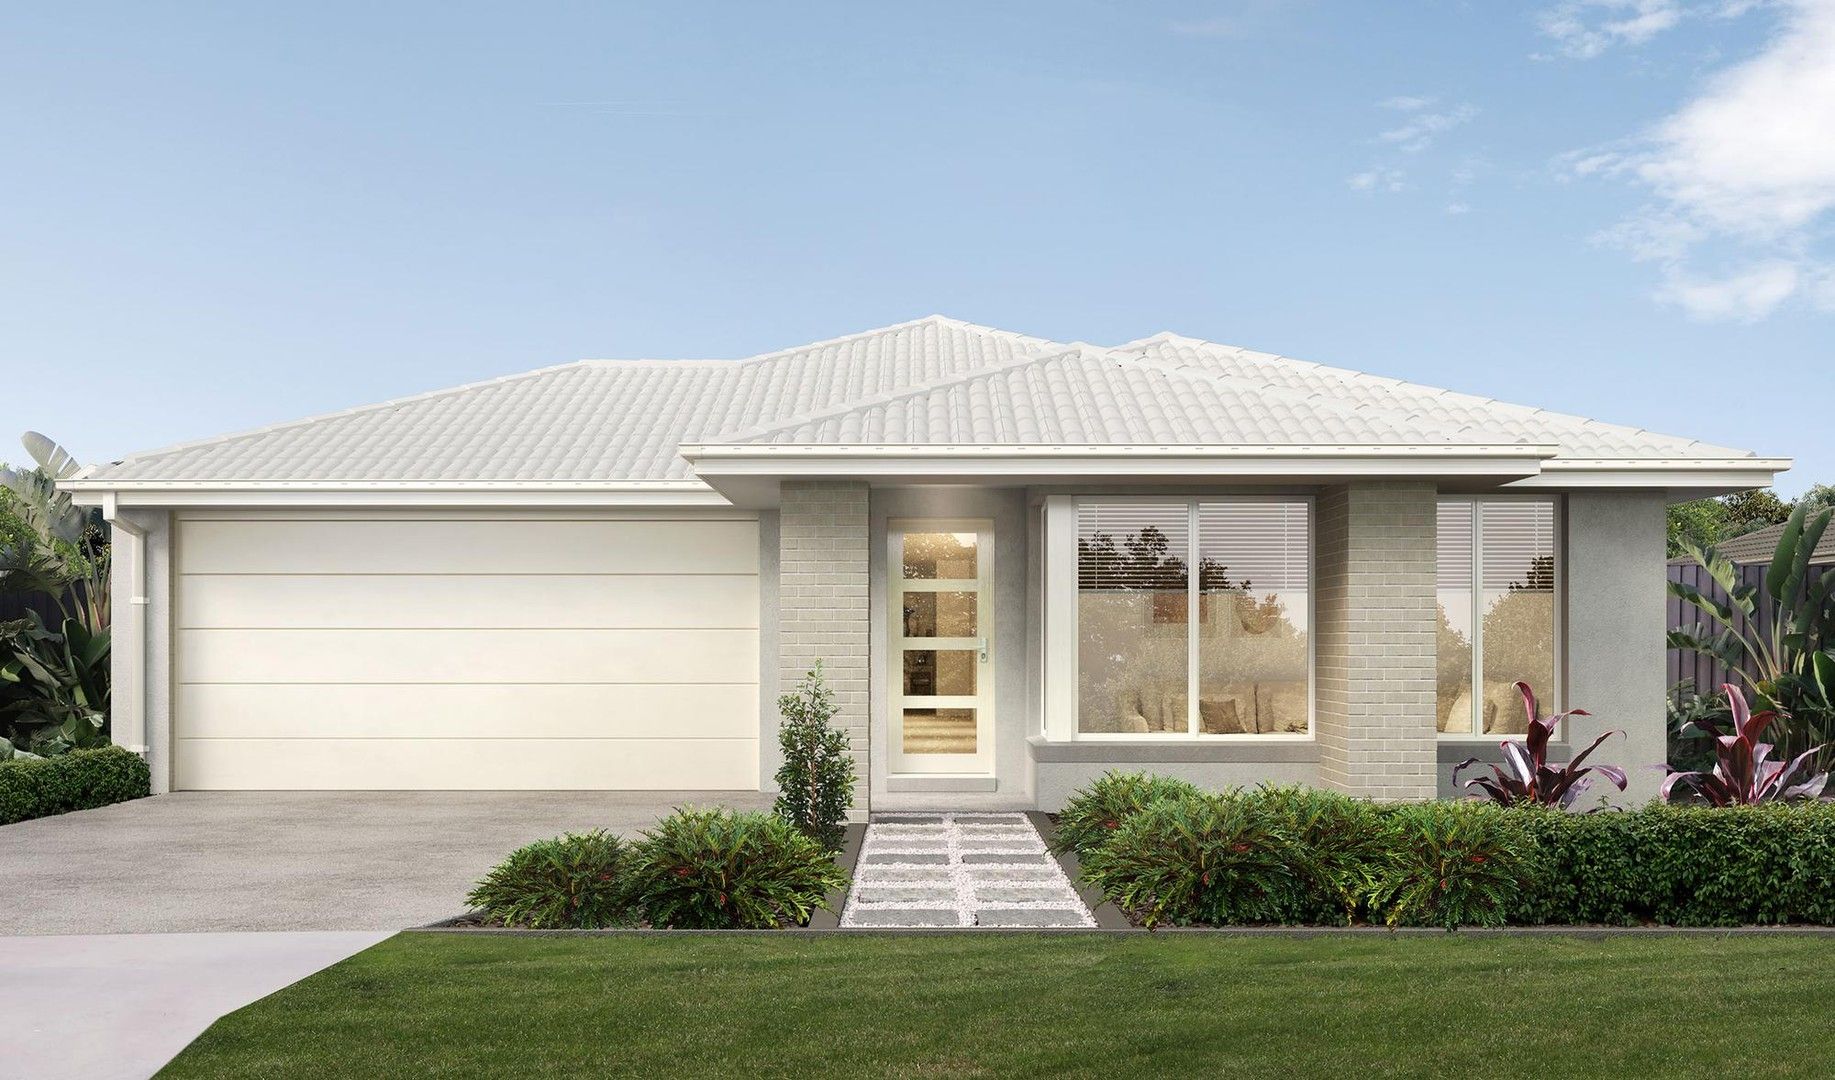 4 bedrooms New House & Land in 1477 New Road CABOOLTURE SOUTH QLD, 4510